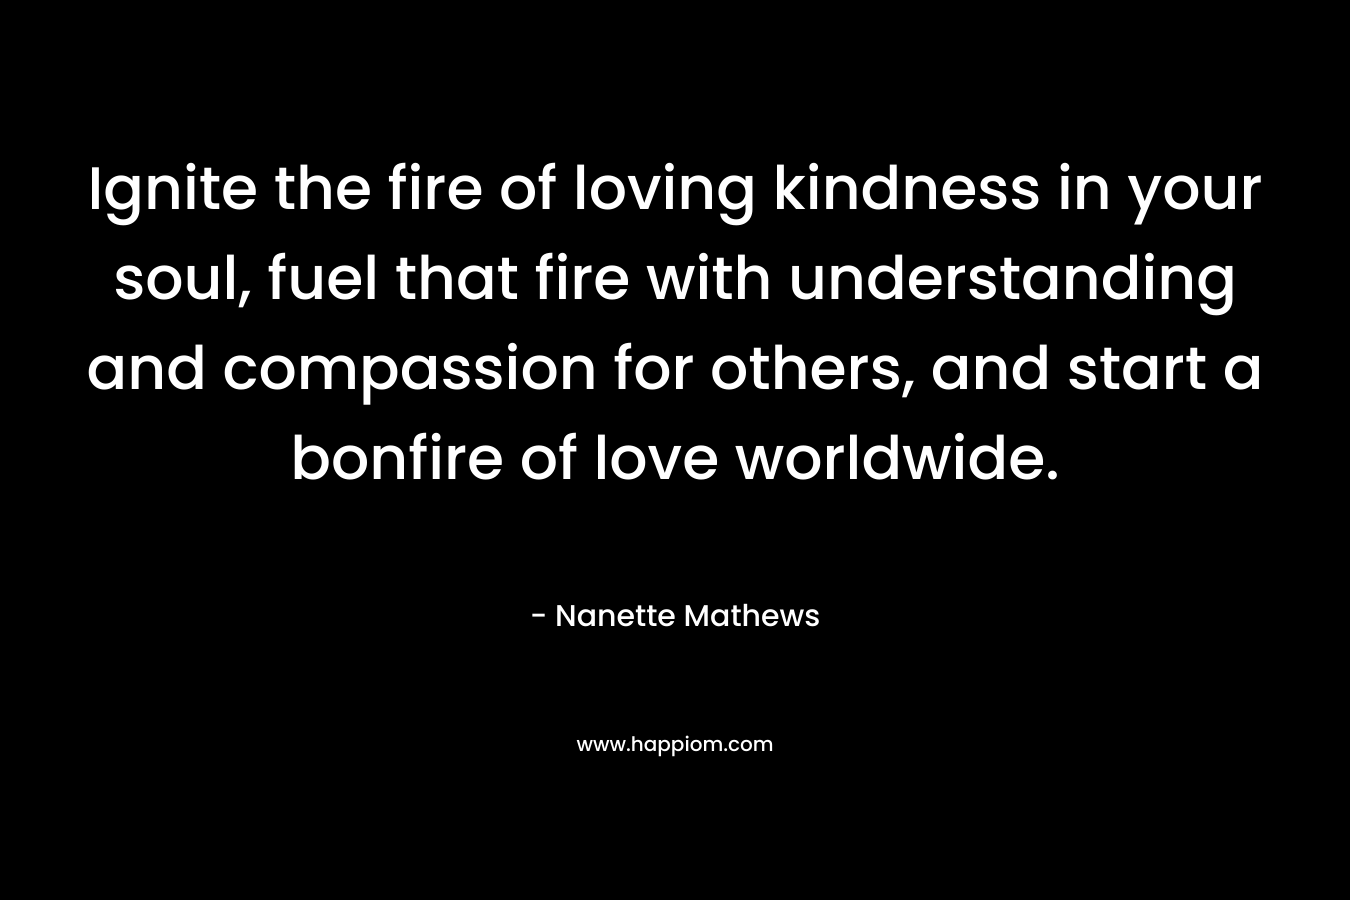 Ignite the fire of loving kindness in your soul, fuel that fire with understanding and compassion for others, and start a bonfire of love worldwide. – Nanette Mathews